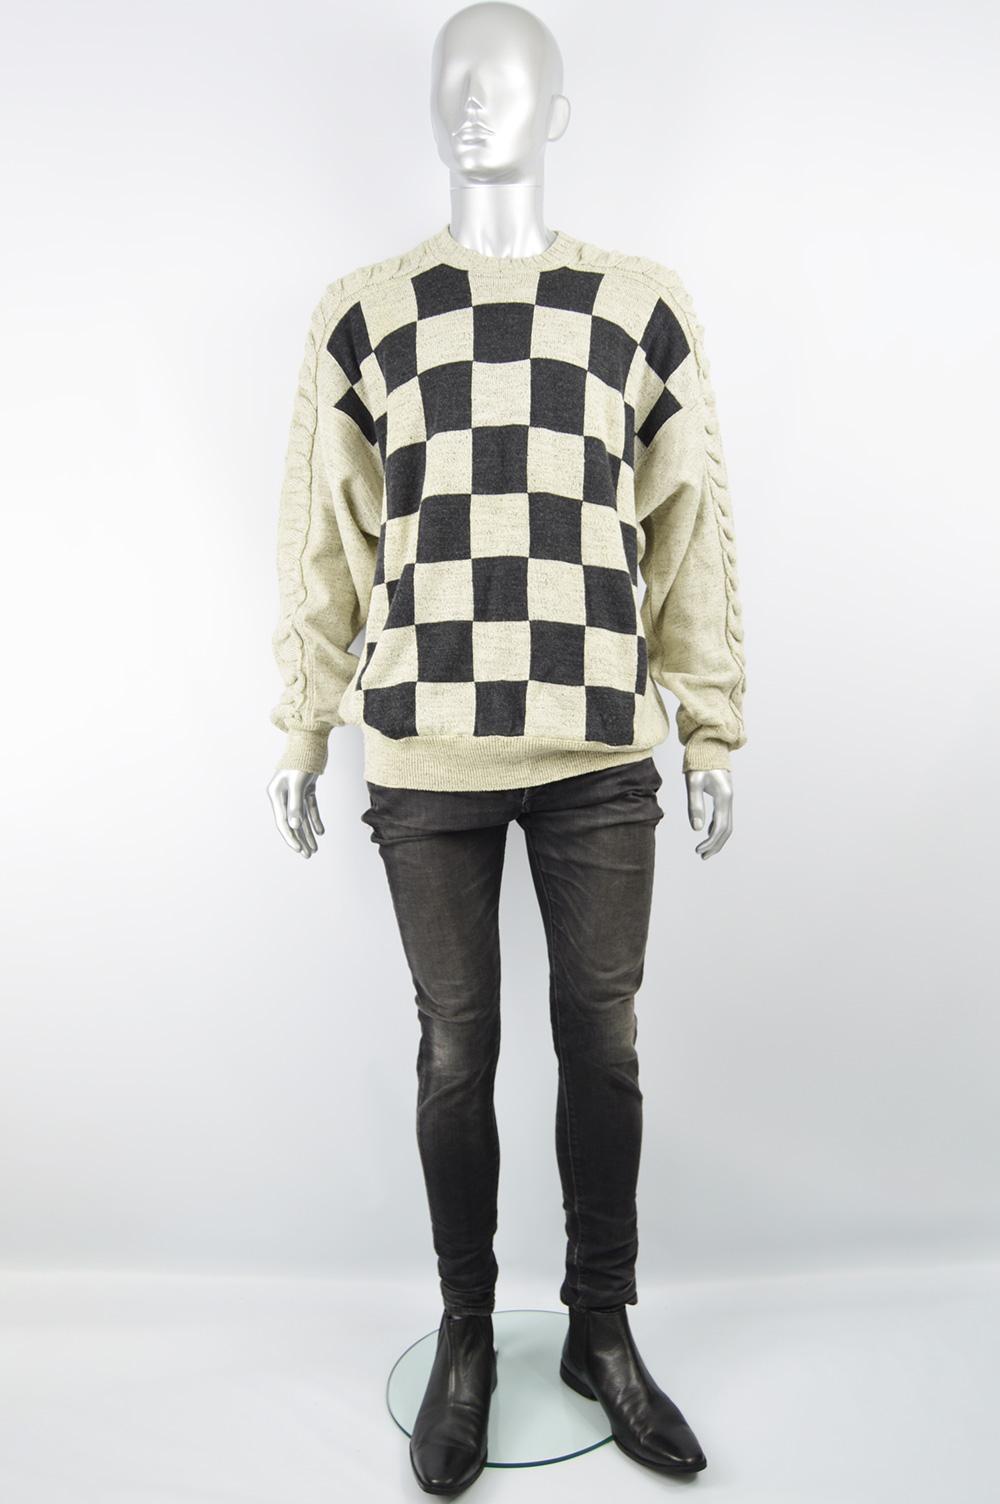 Size: Marked IT 52 which is roughly a Men’s Large. This gives a slouchy, loose fit. 
Chest - 50” / 127cm
Waist - 46” / 117cm
Length (Shoulder to Hem) - 29” / 73cm

A cool vintage mens crew neck jumper from the 80s by luxury Italian knitwear label,